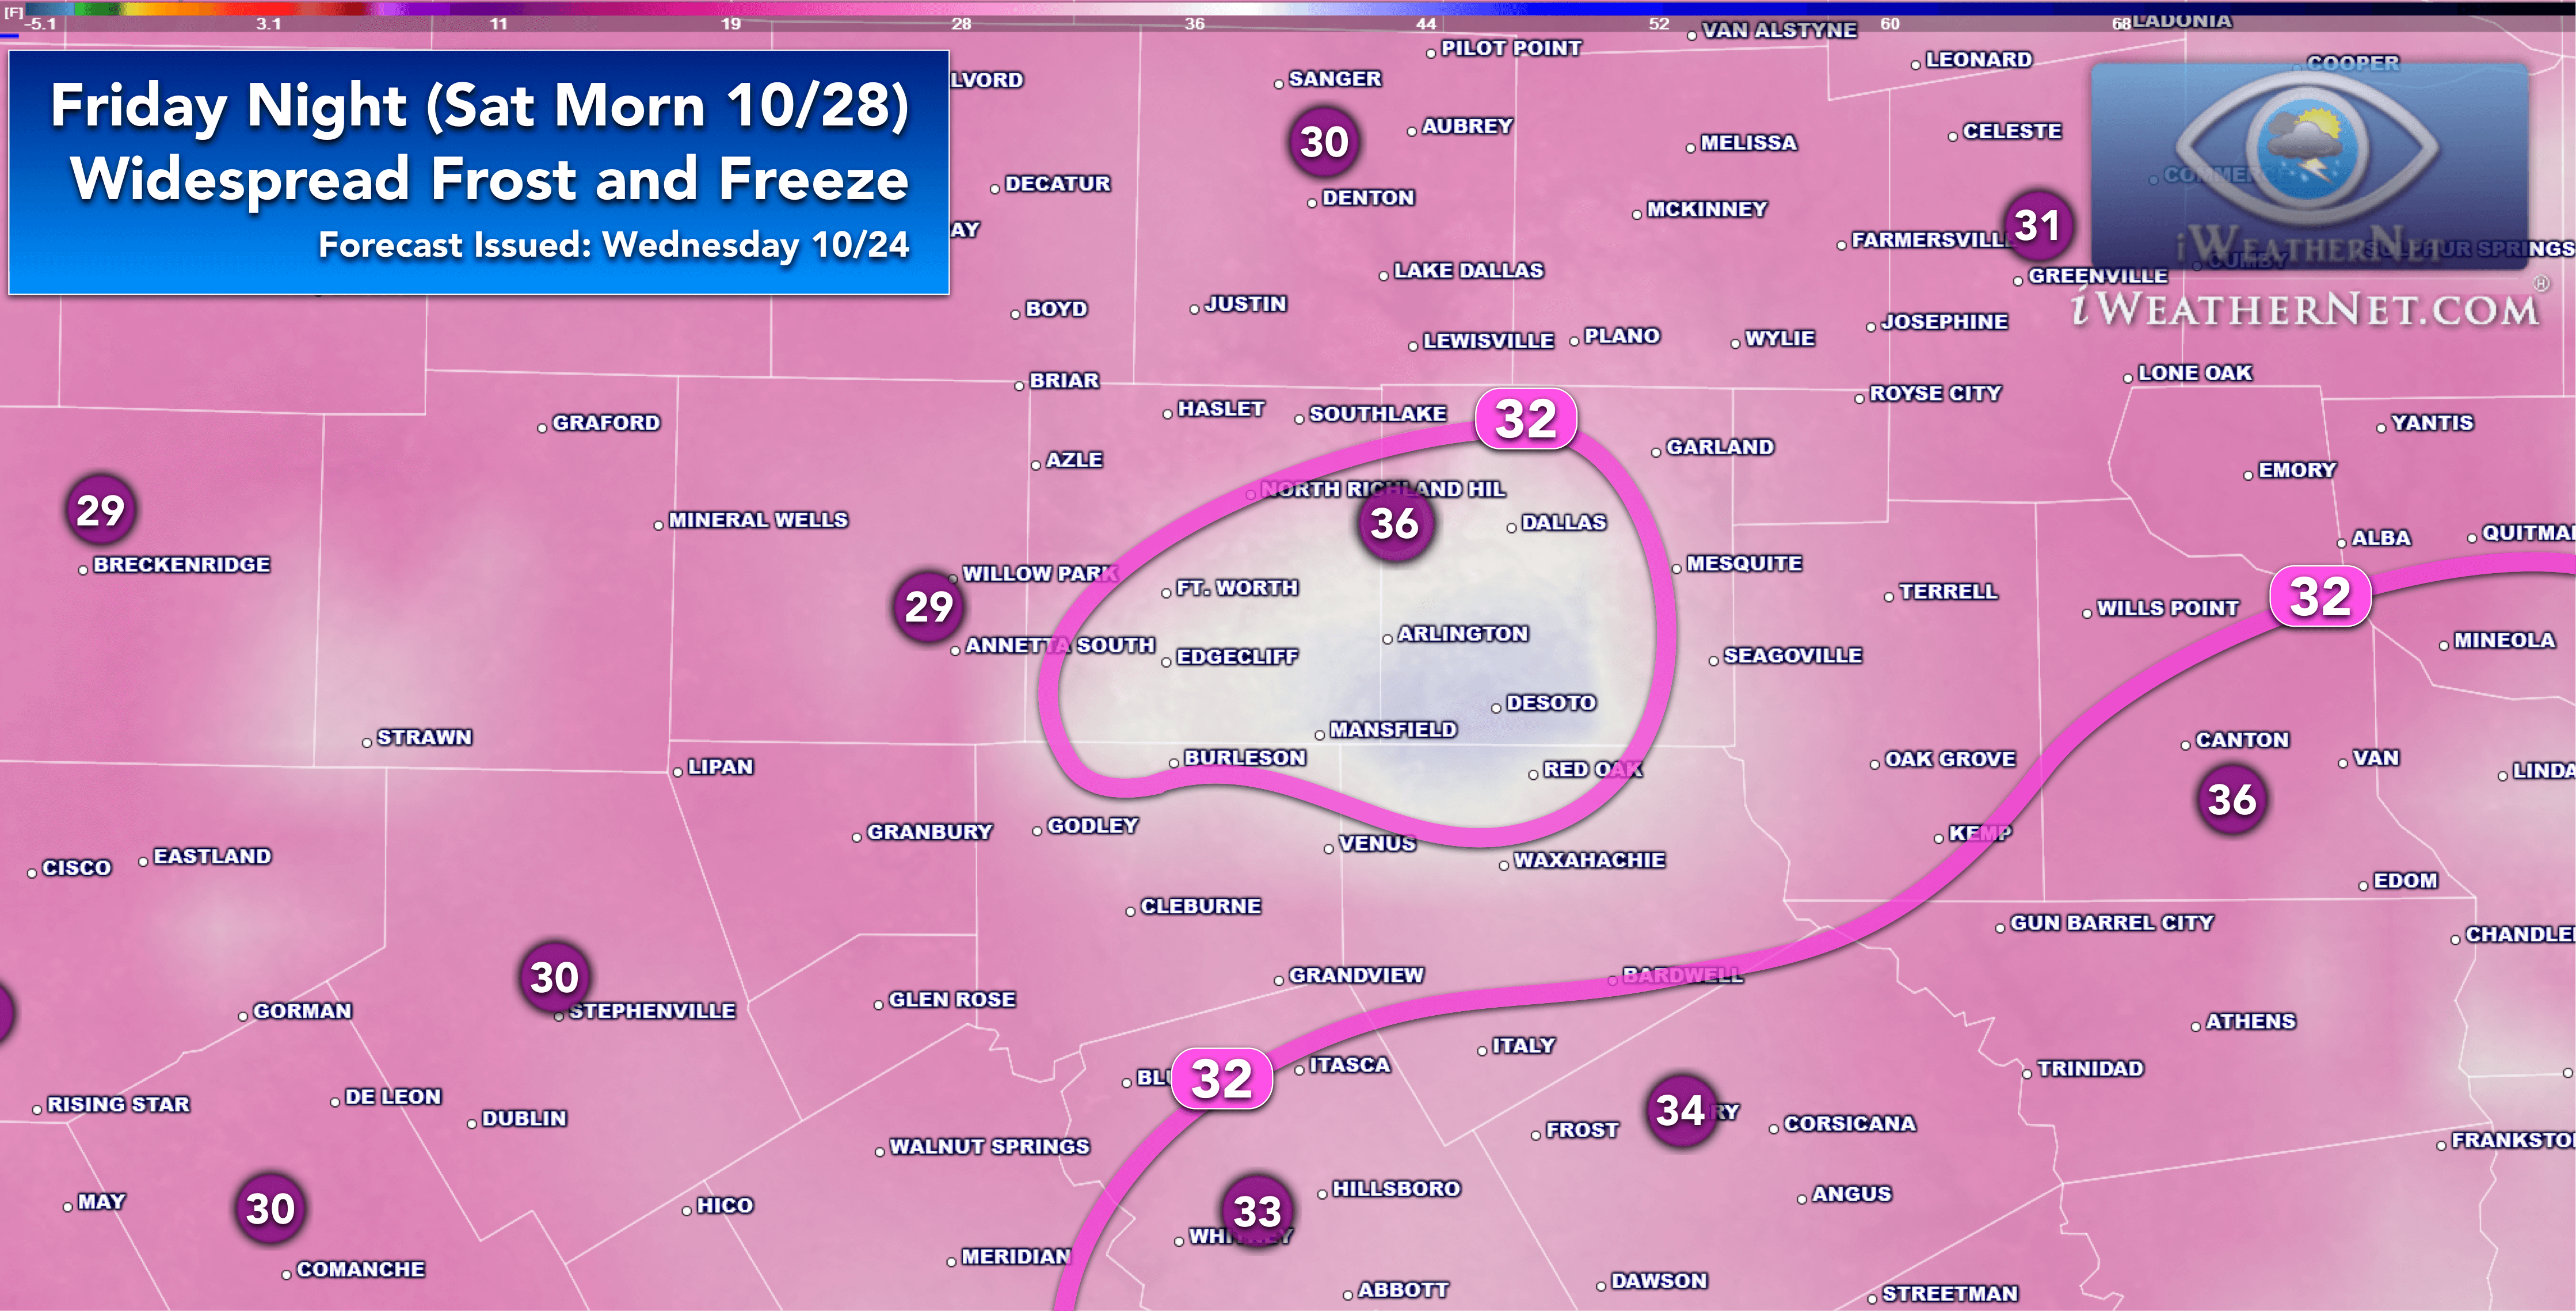 frost and freezing temperatures likely over much of North Texas this upcoming Friday night (10/27/17).